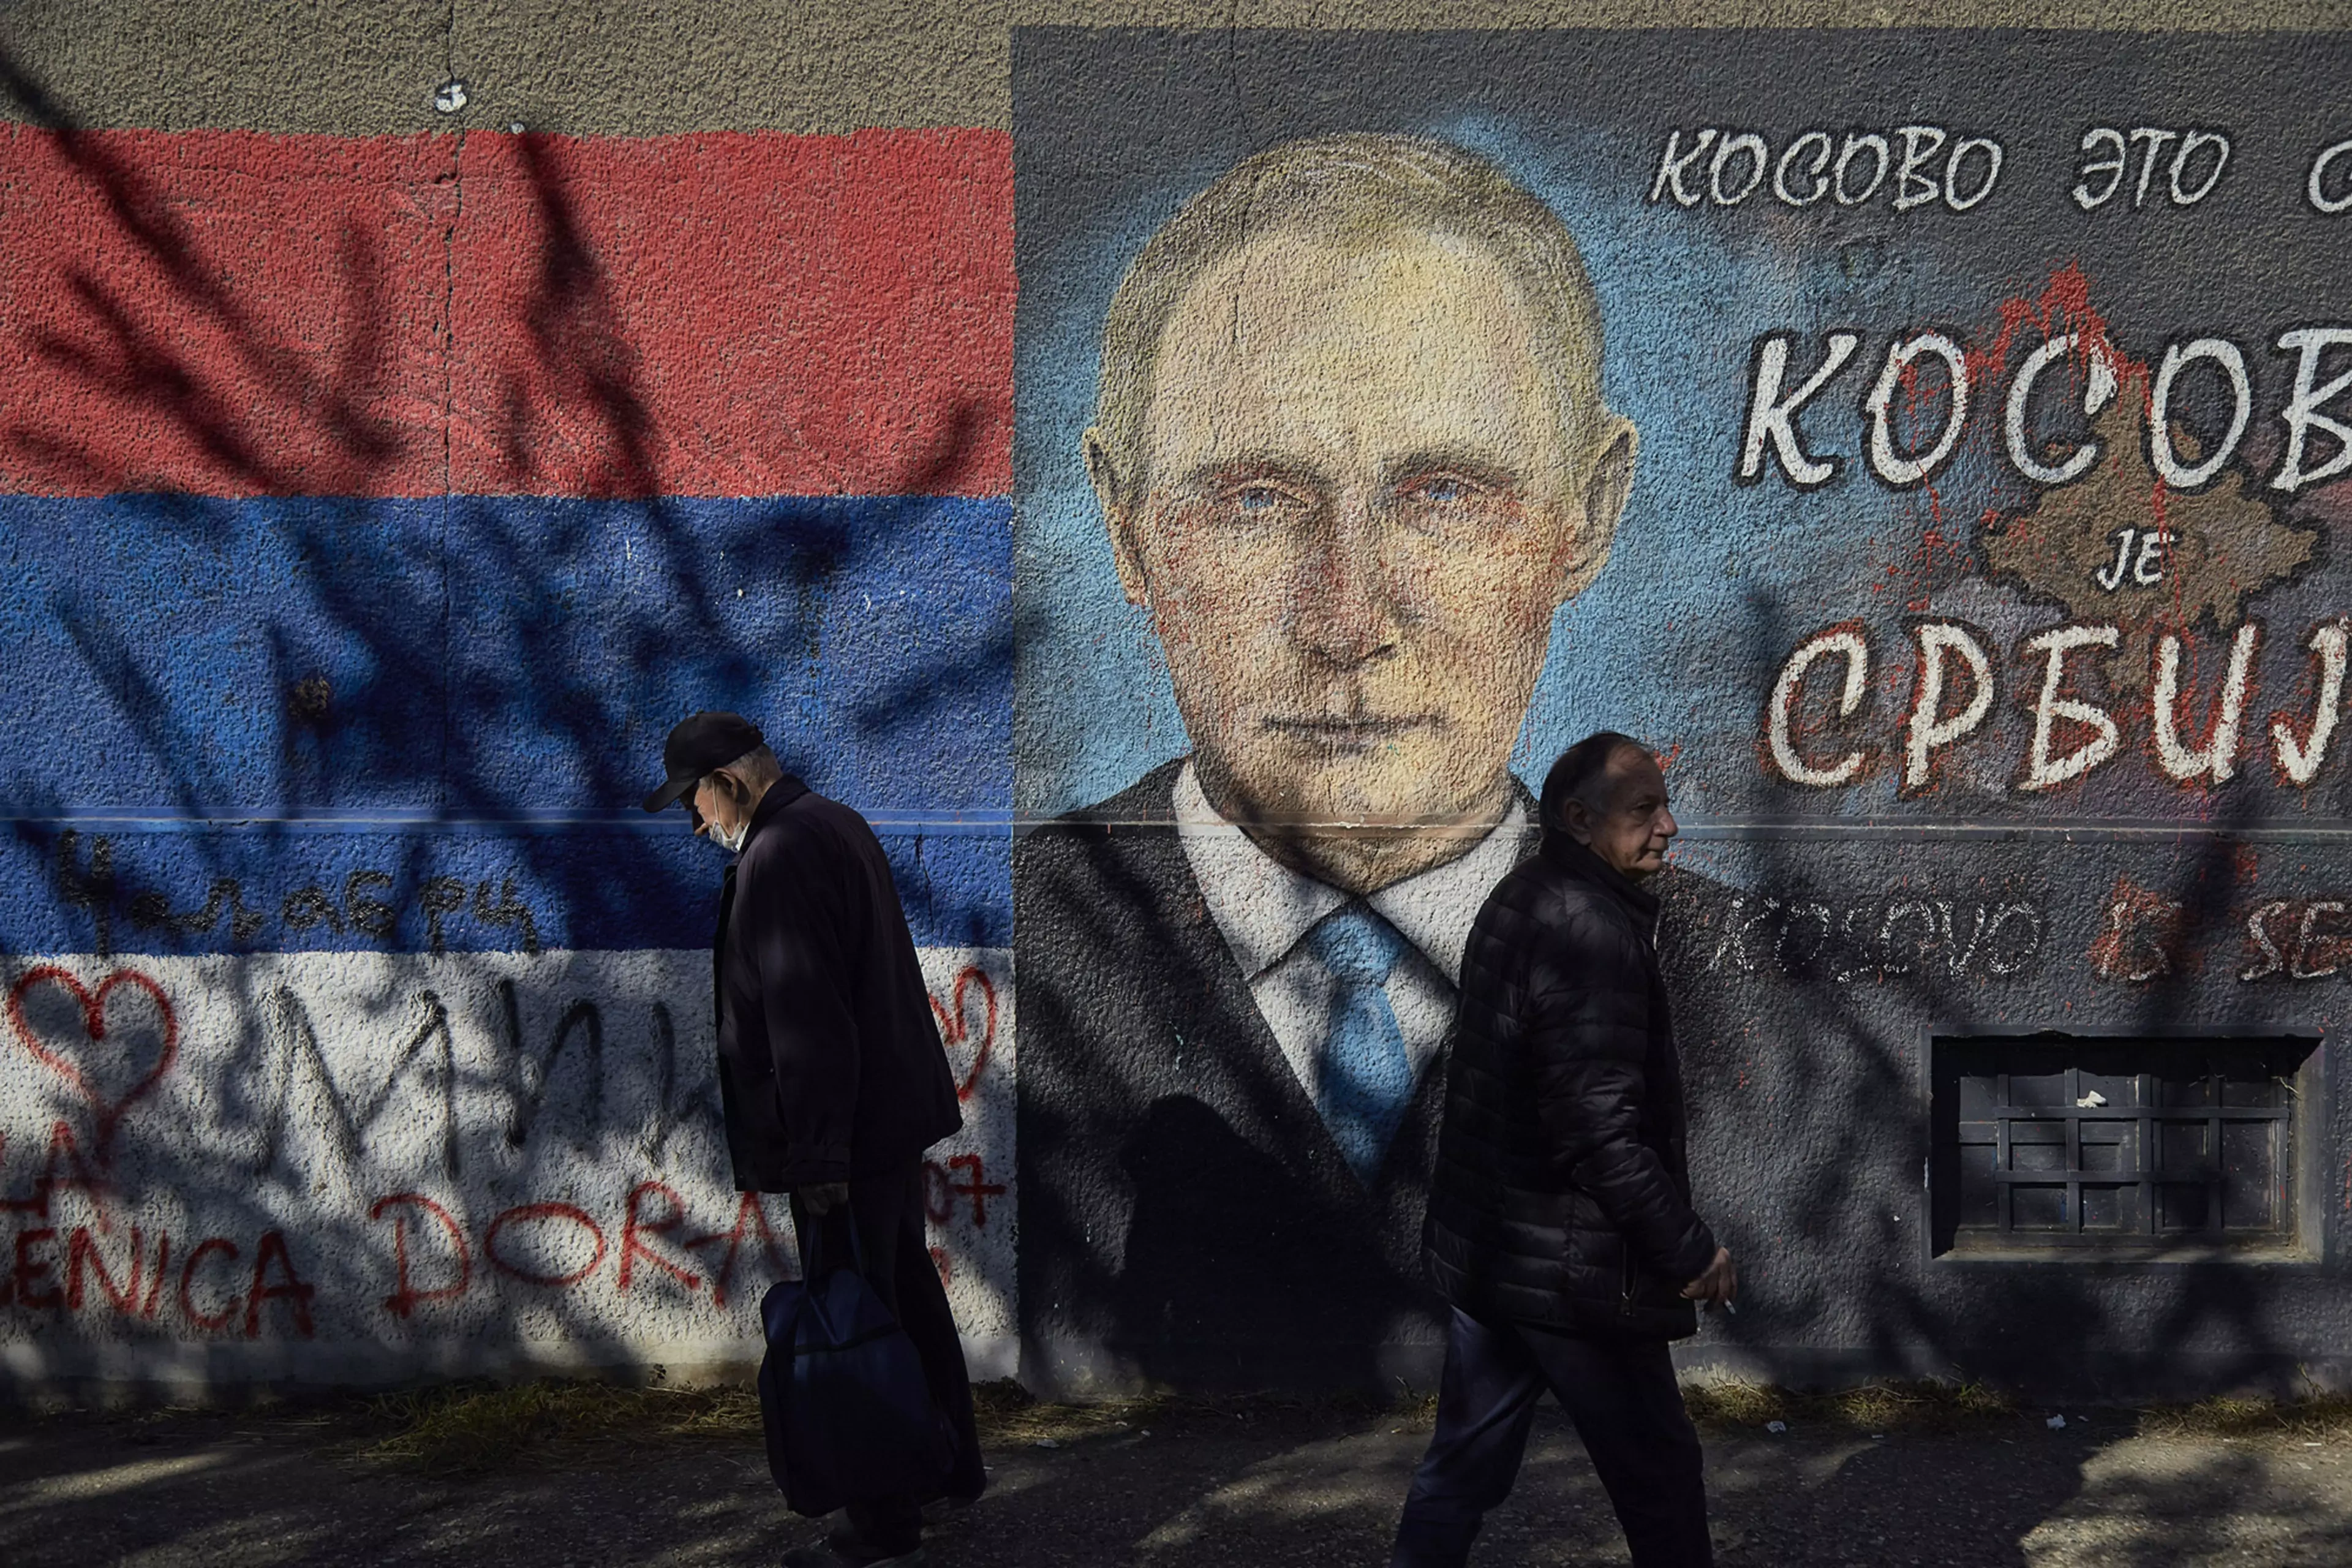 A mural in Belgrade depicts Russian President Vladimir Putin and a text reading “Kosovo is Serbia.”